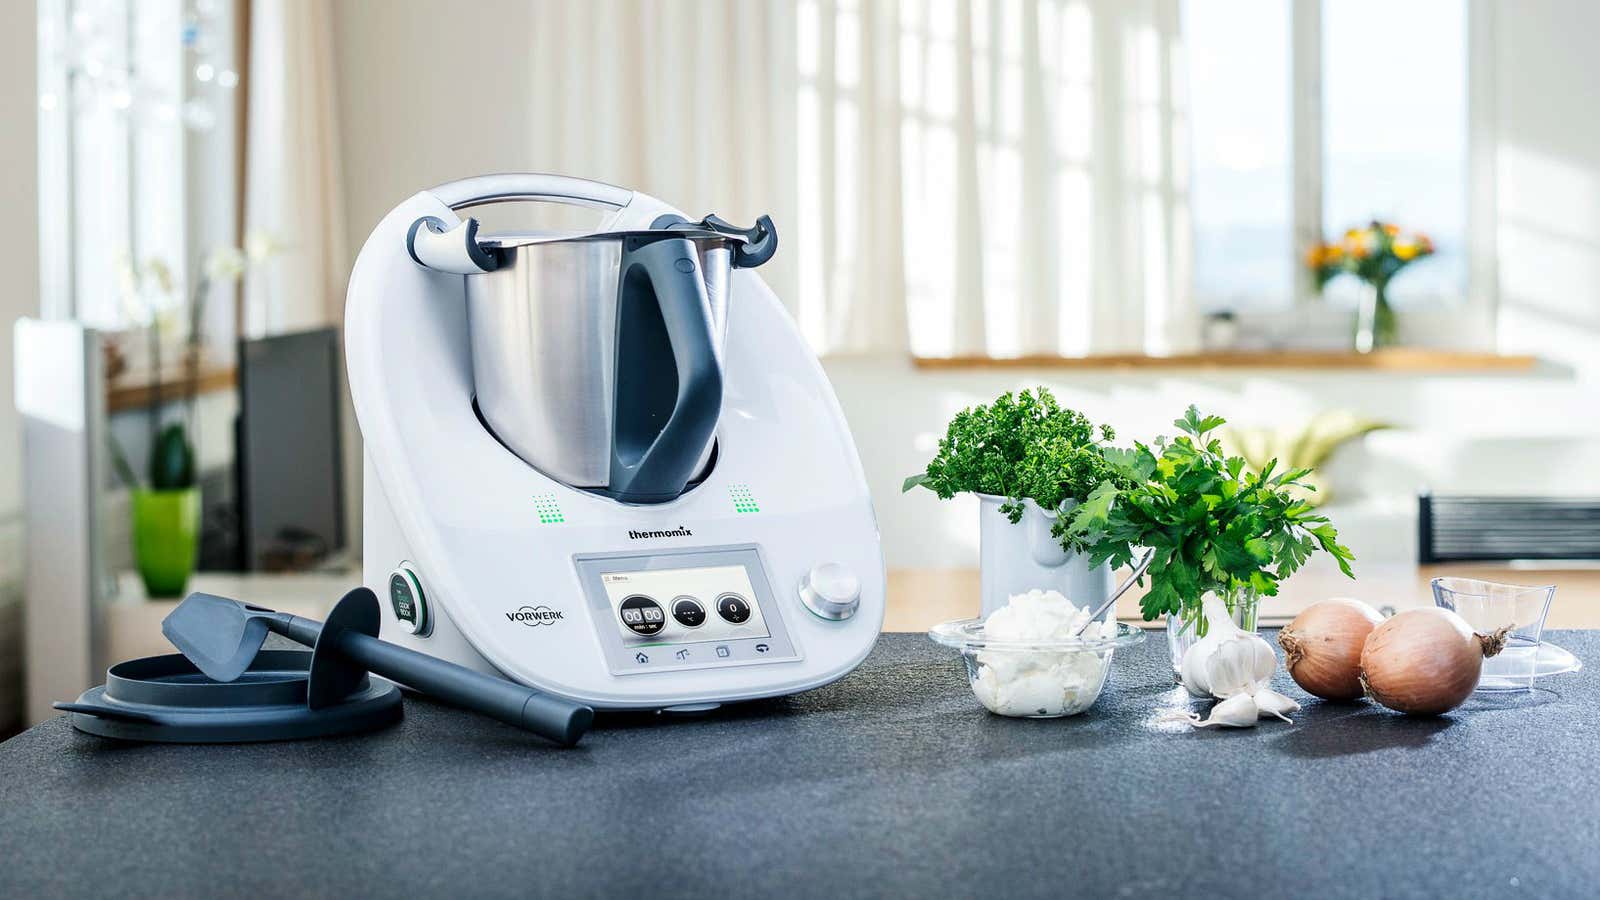 Thermomix, Vorwerks $1,450 kitchen appliance, is coming to the US